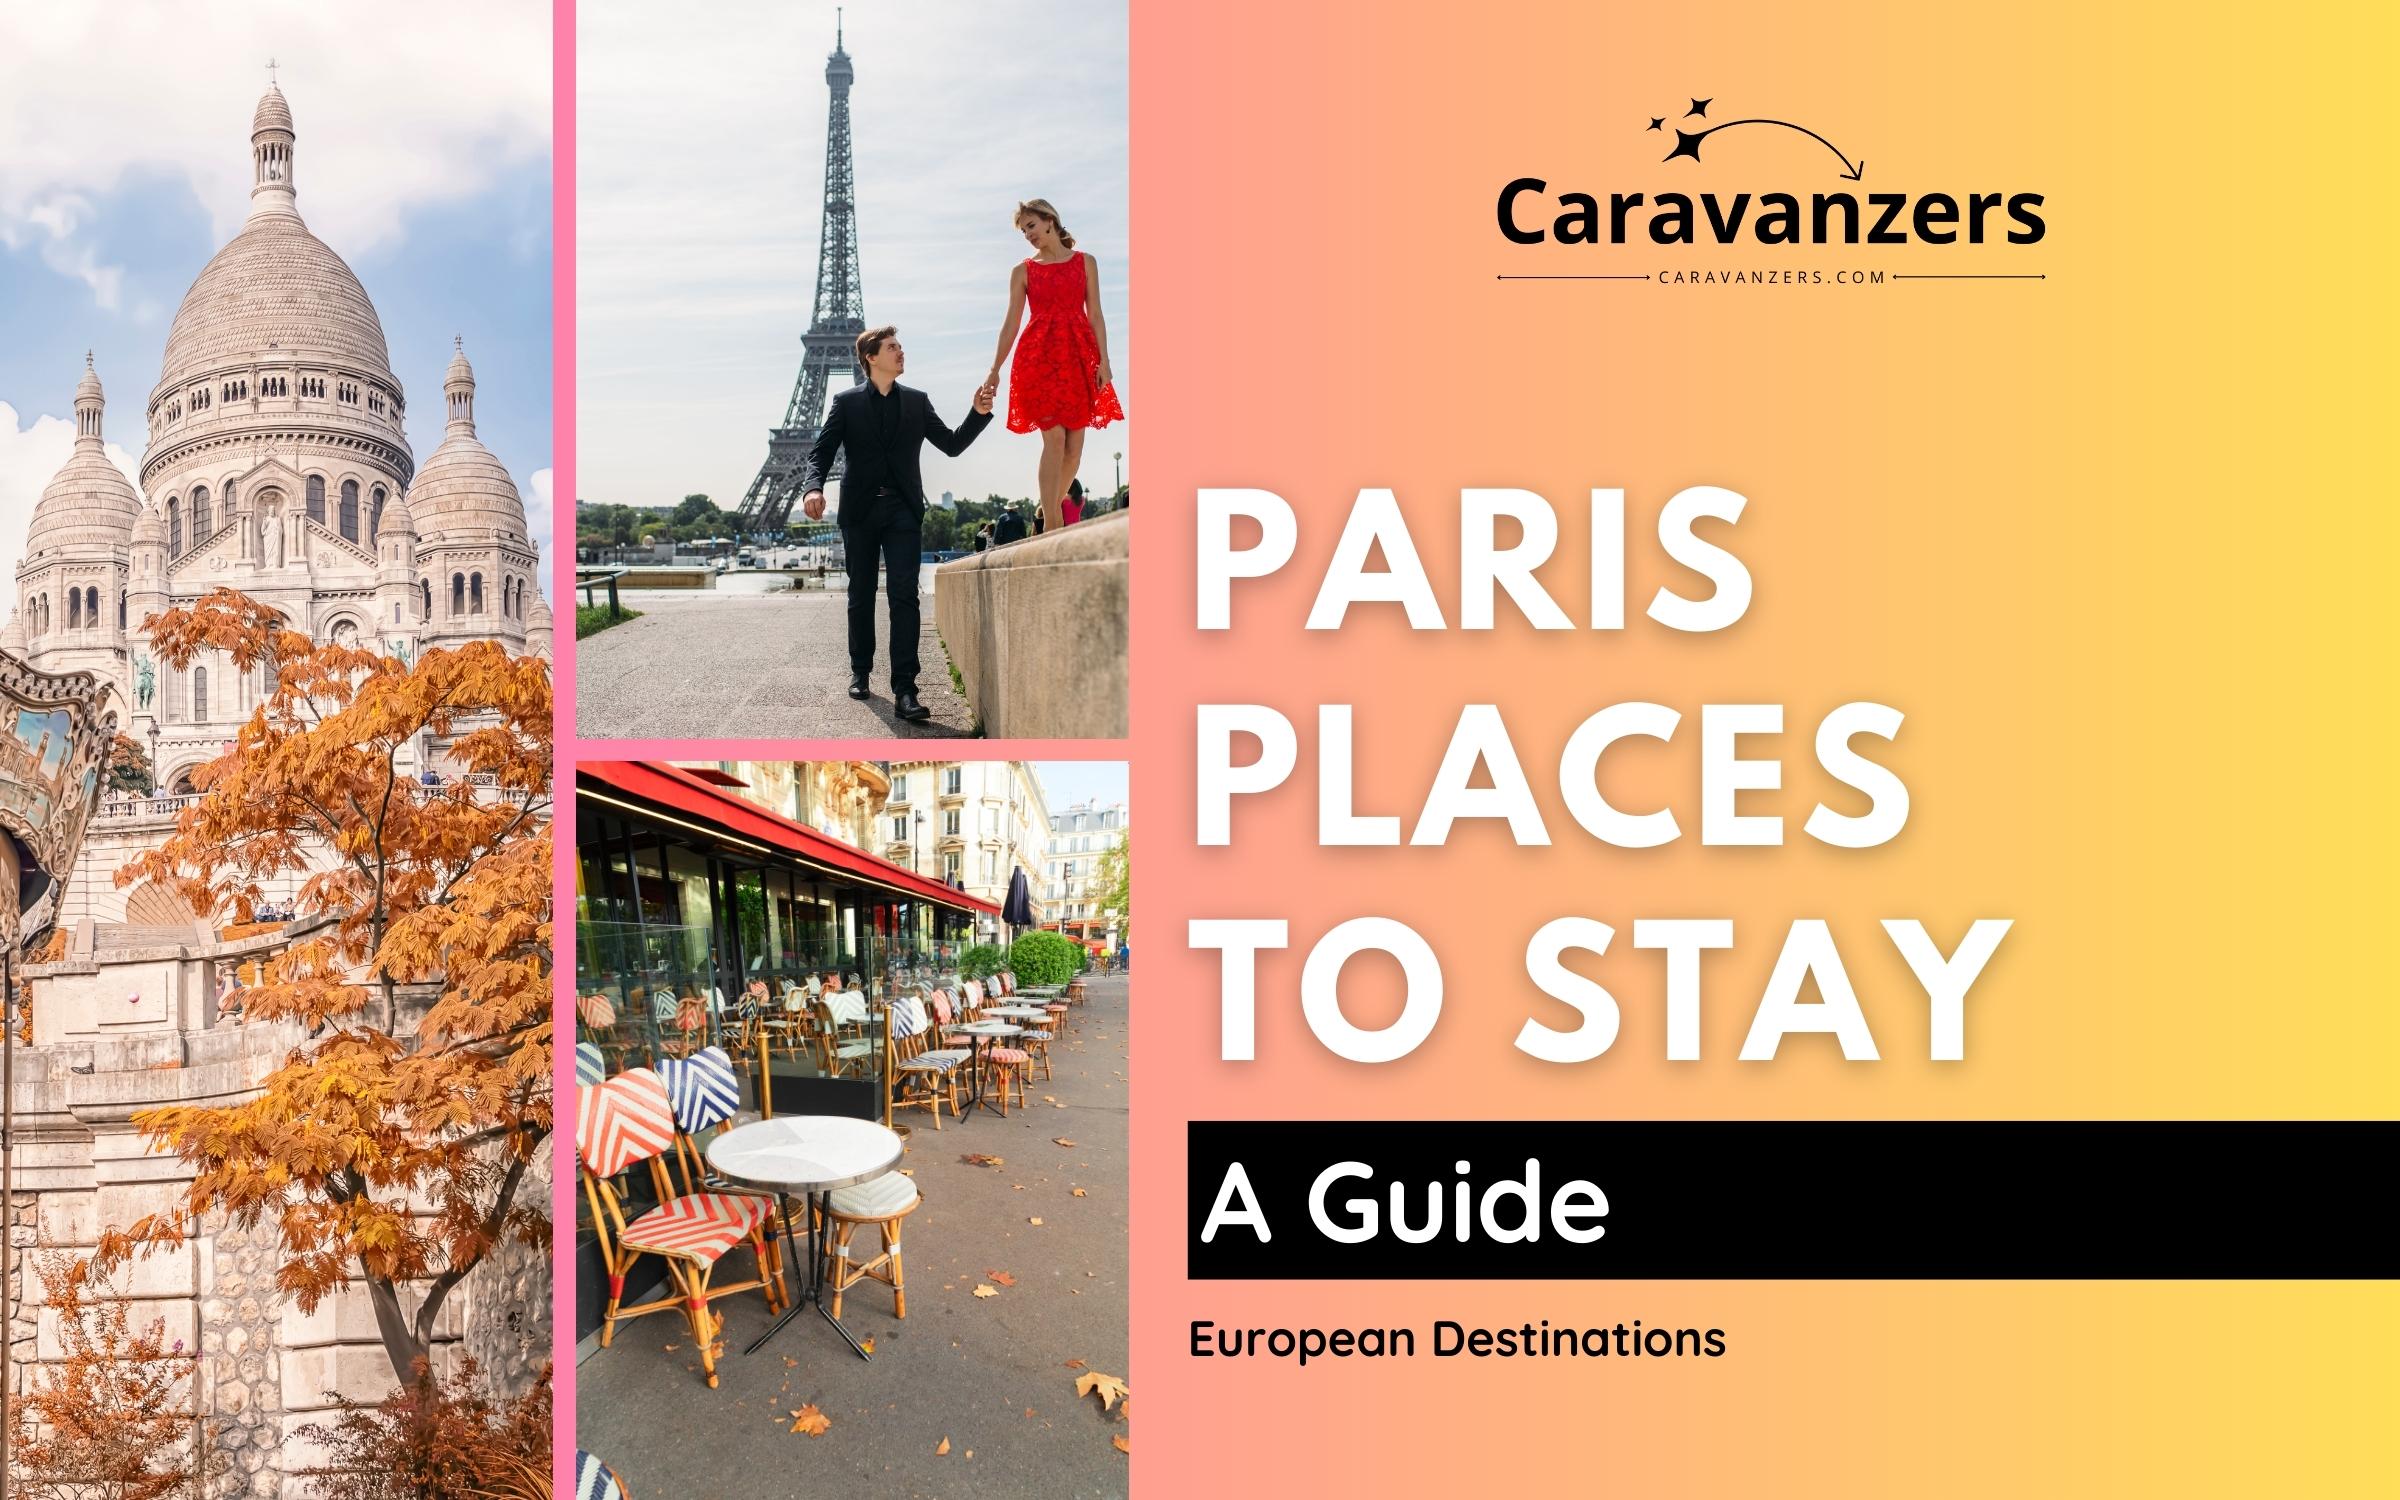 Paris Places to Stay - Travel Guide for Your Trip - Caravanzers